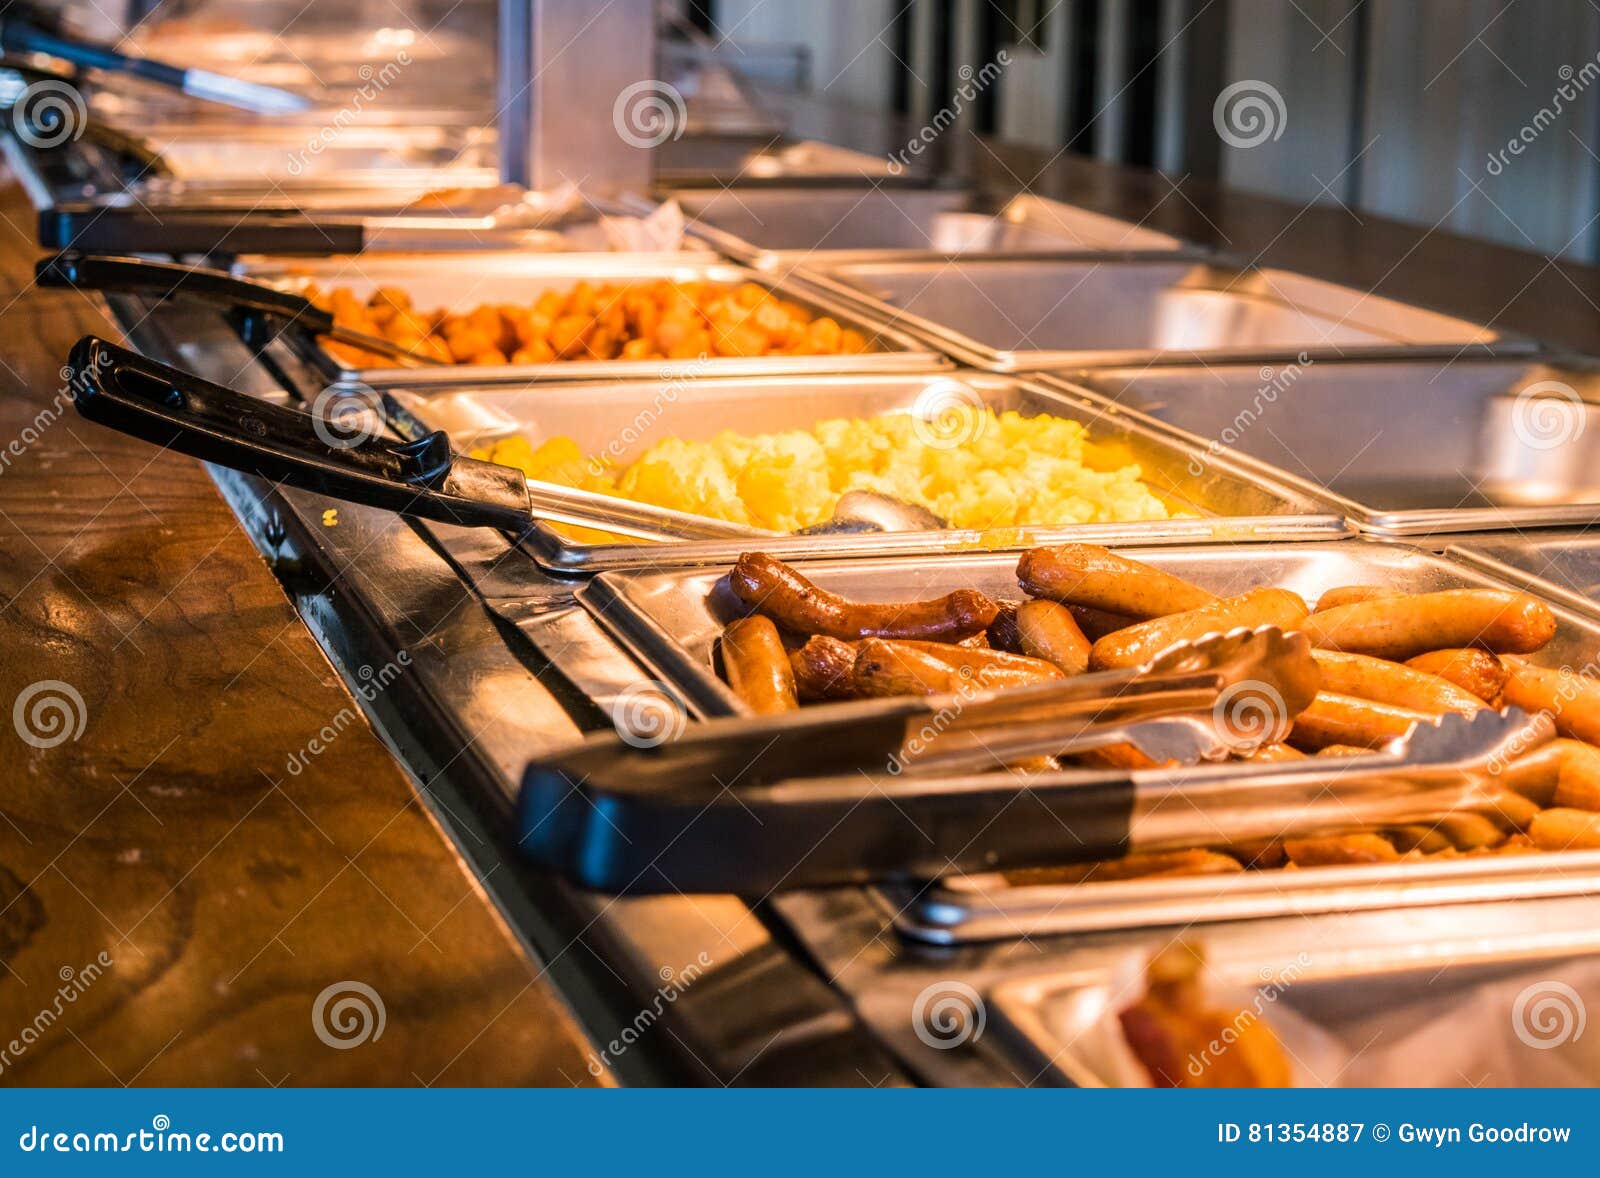 Breakfast Or Brunch Buffet Serving Bacon With Tongs Stock Photo - Download  Image Now - iStock